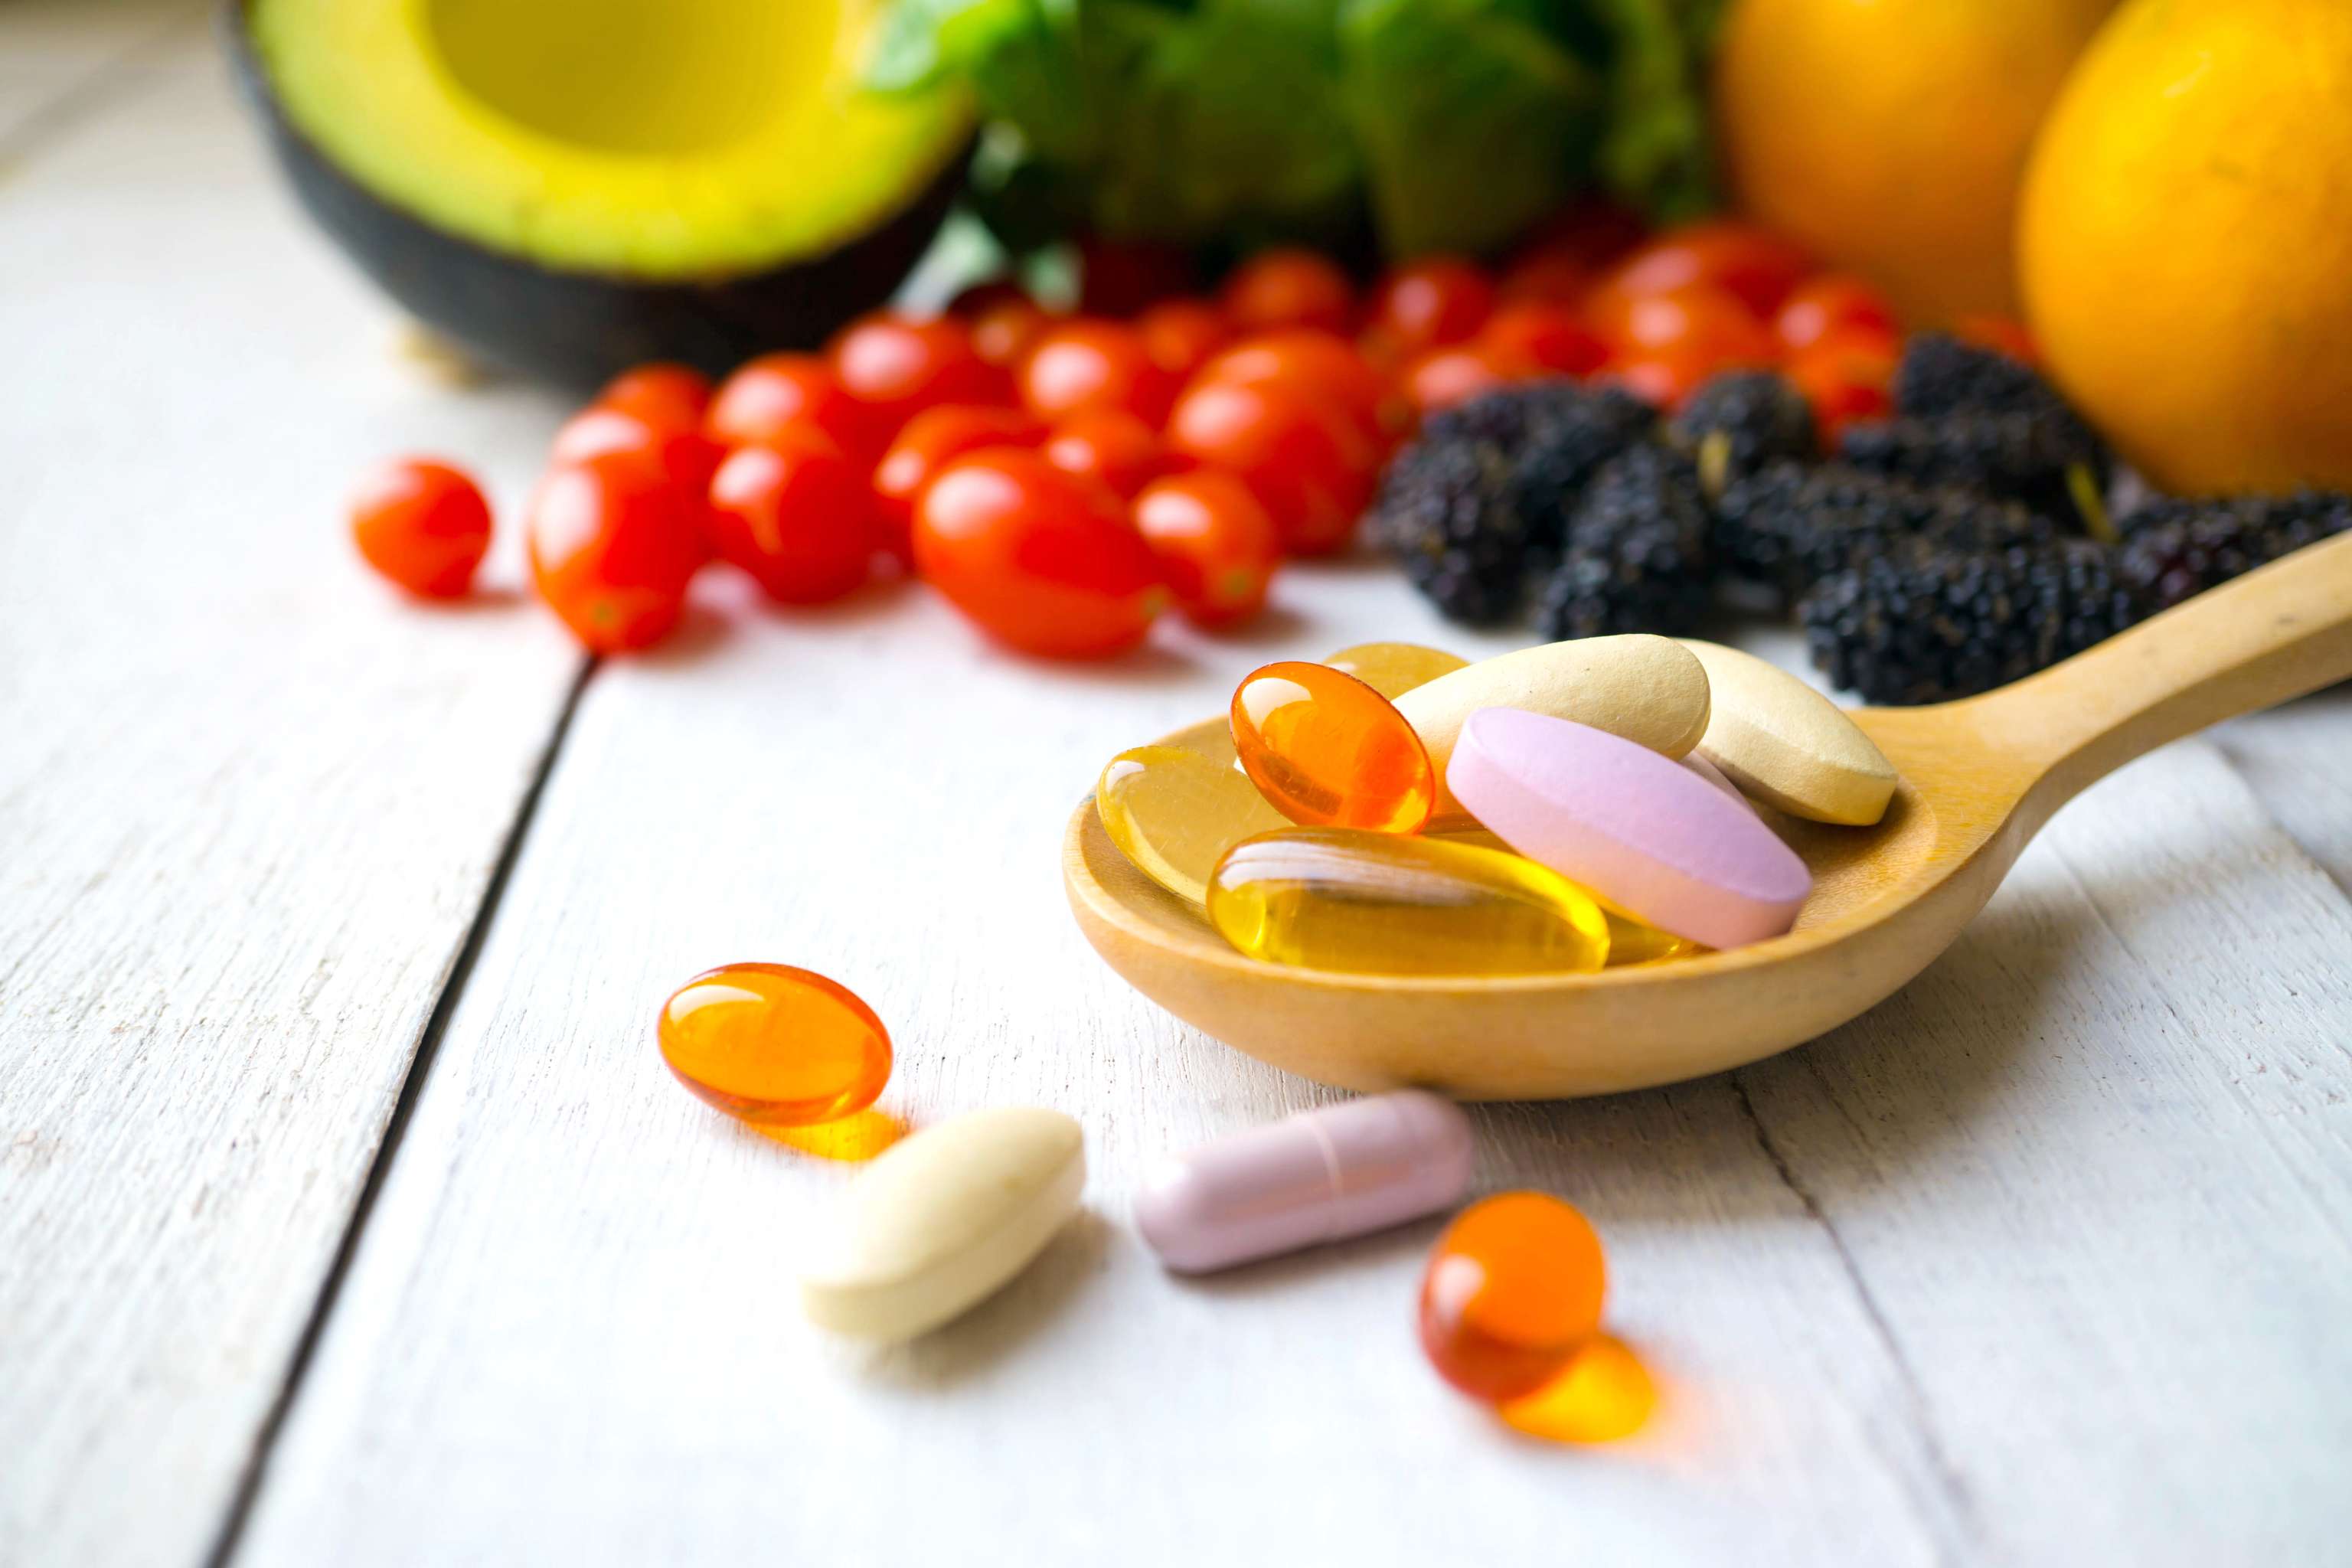 Does a vitamin A-rich diet protect against skin cancer?